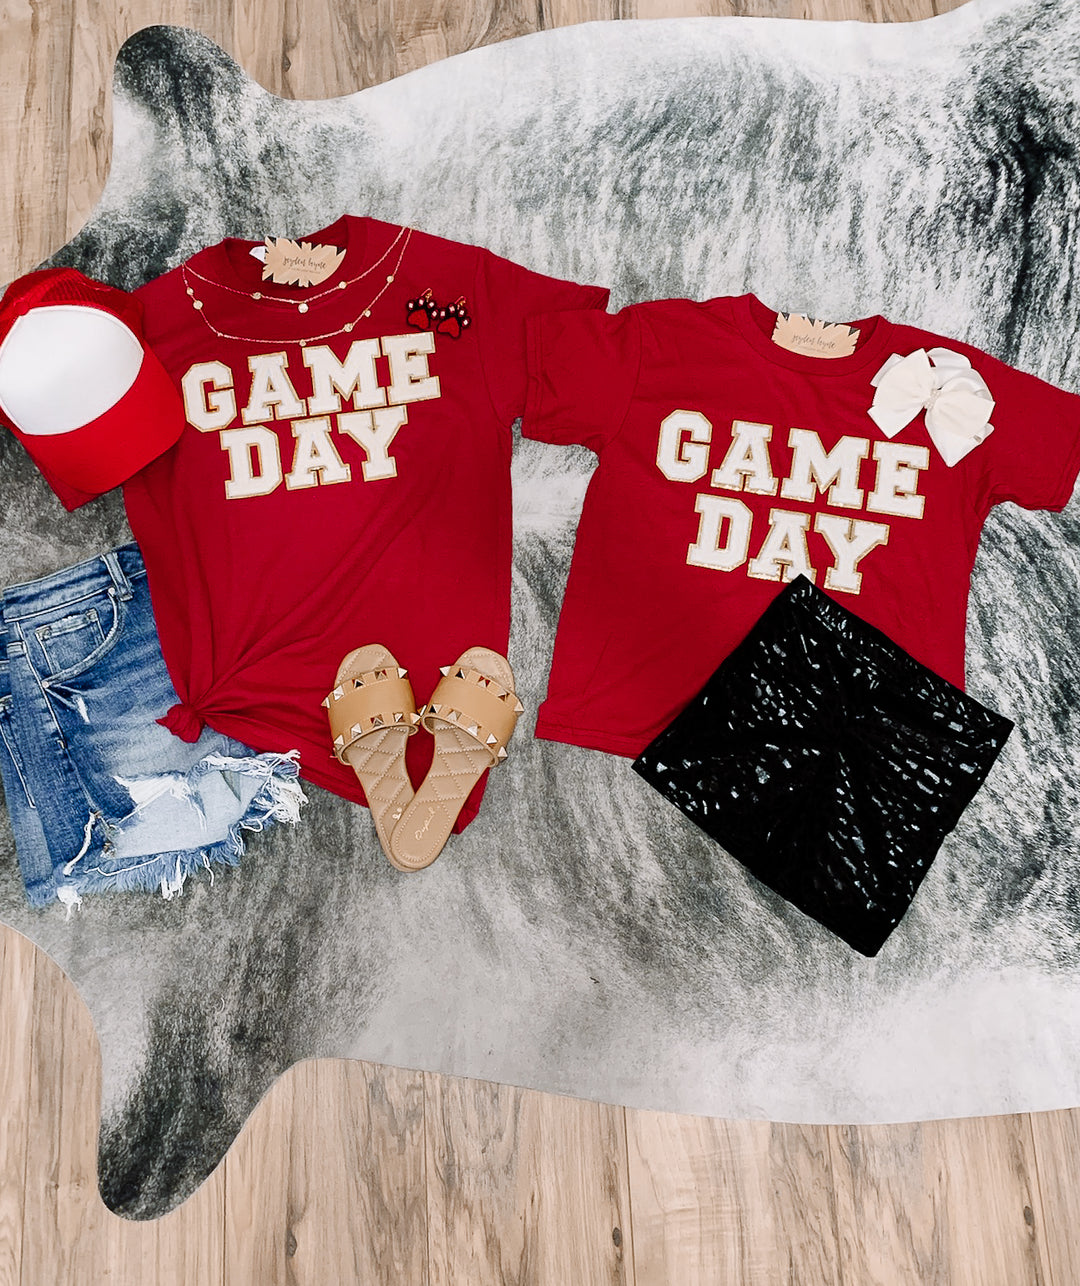 Red/White Chenille Game Day Tee